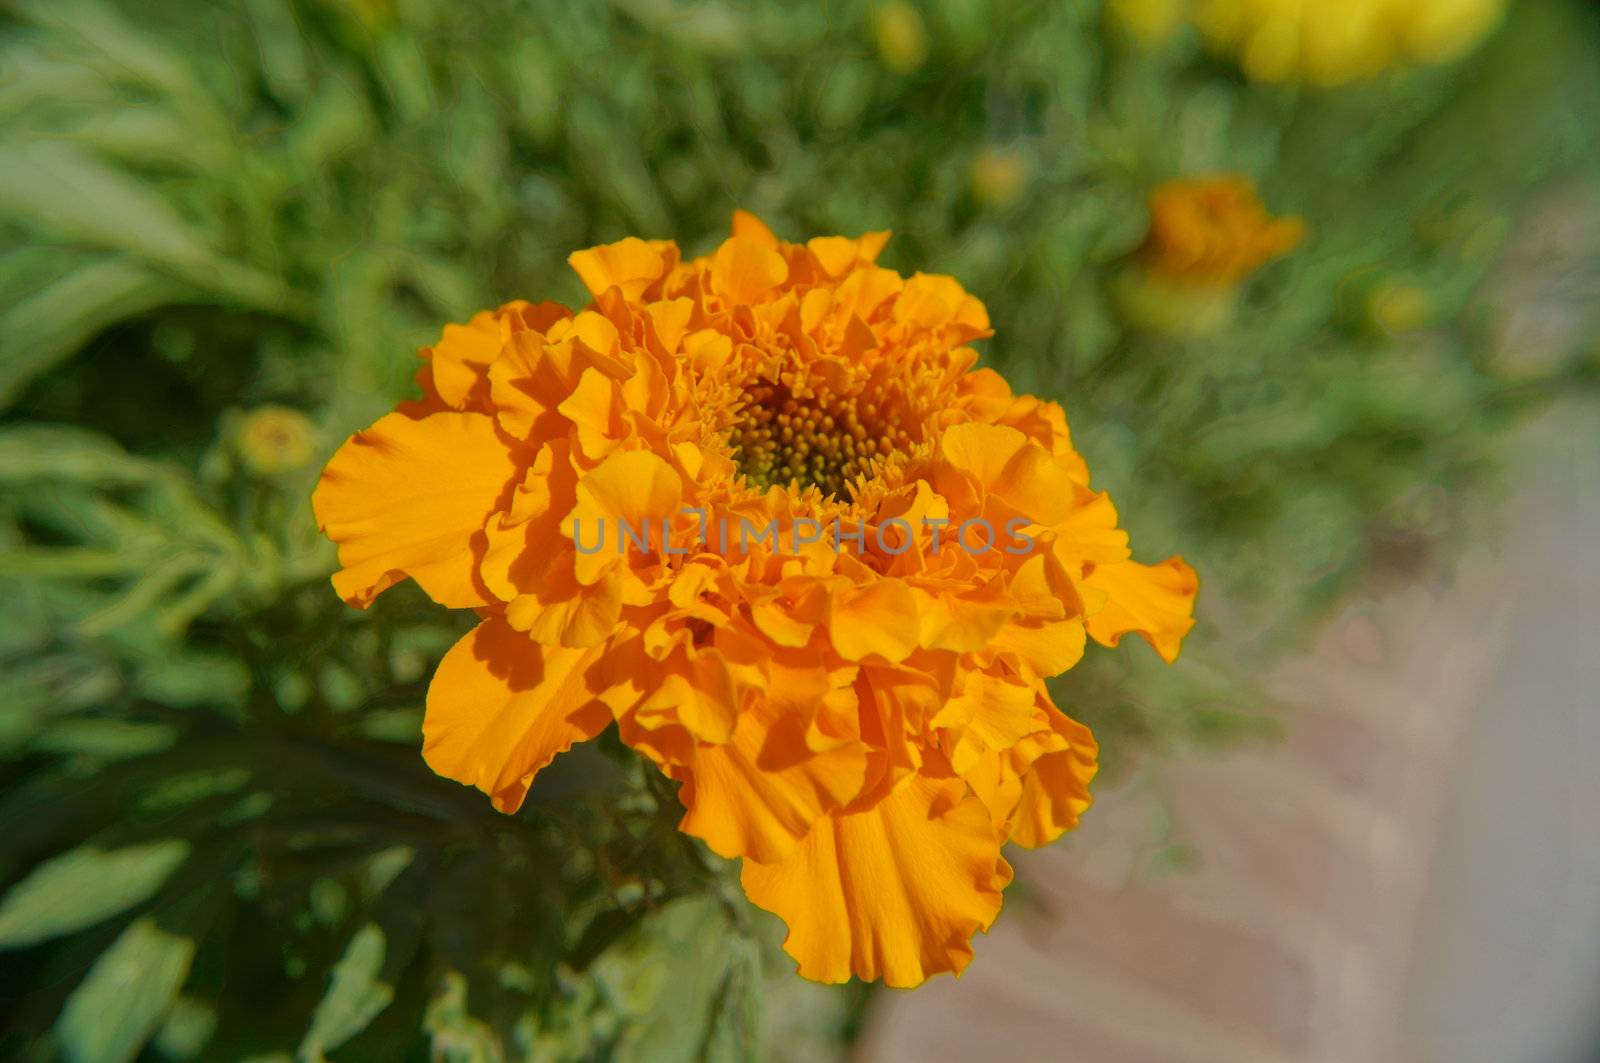 Marigold by Elet